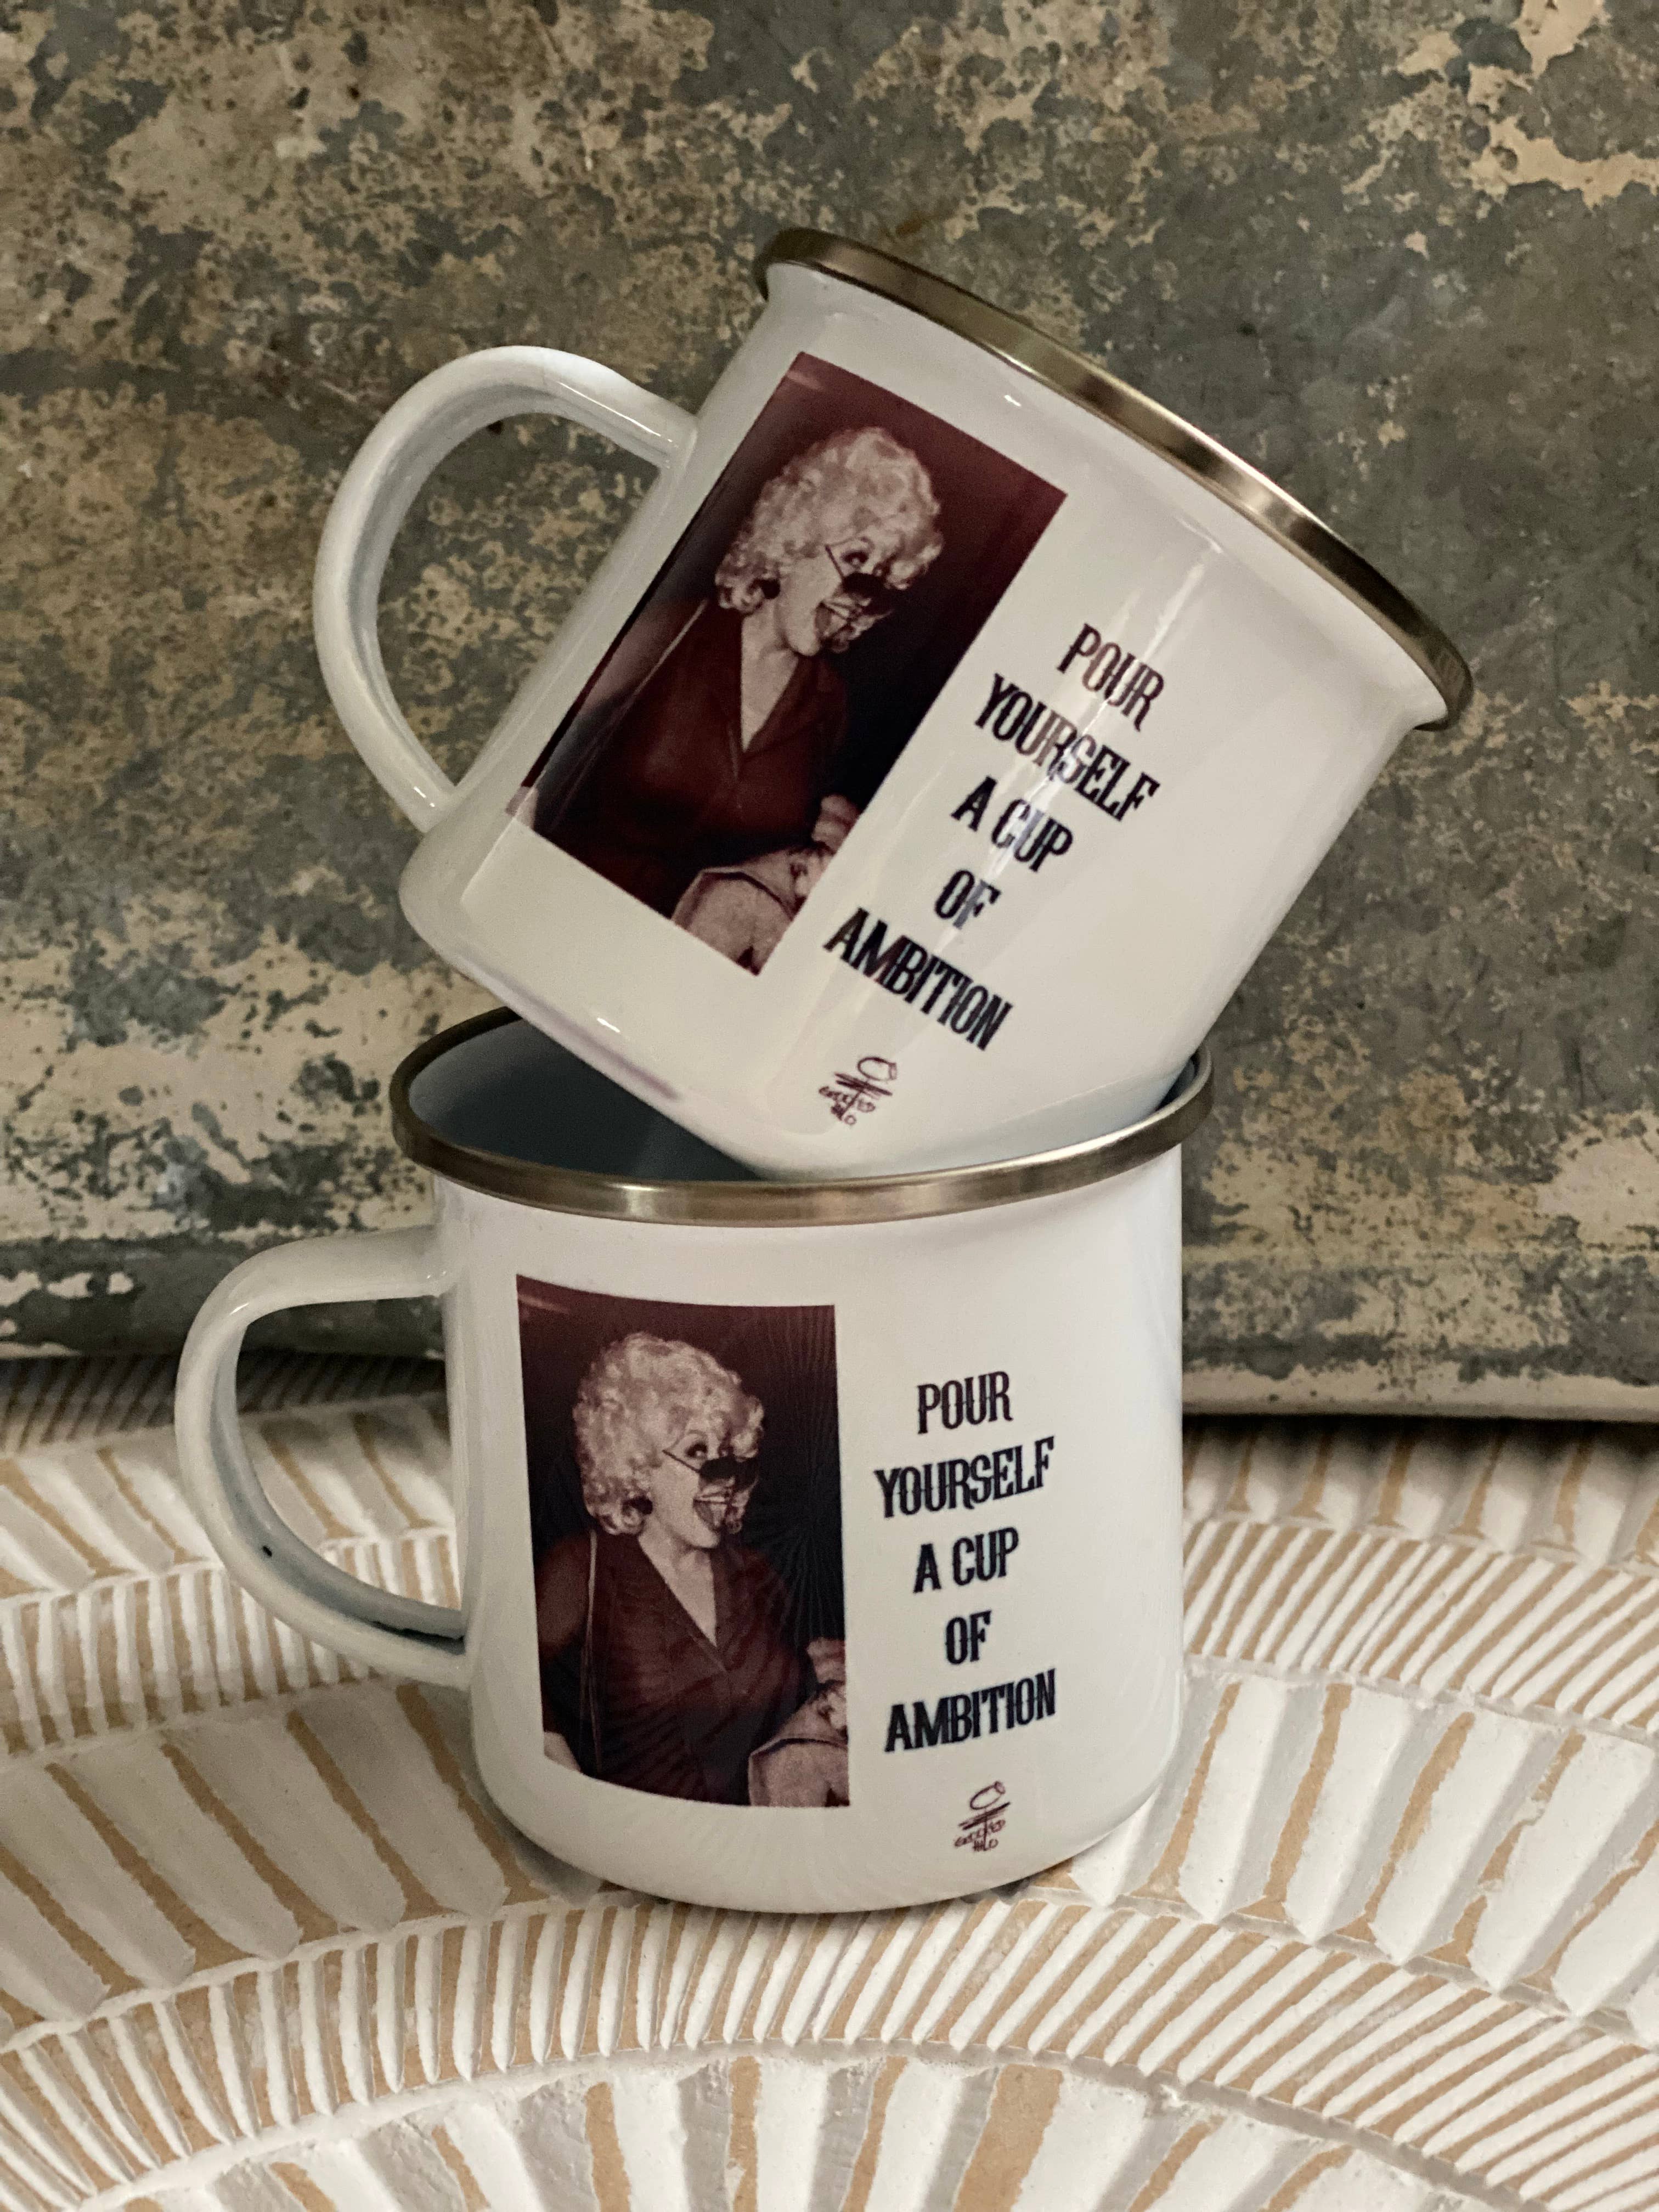 Dolly Cup of Ambition Metal Coffee Mug